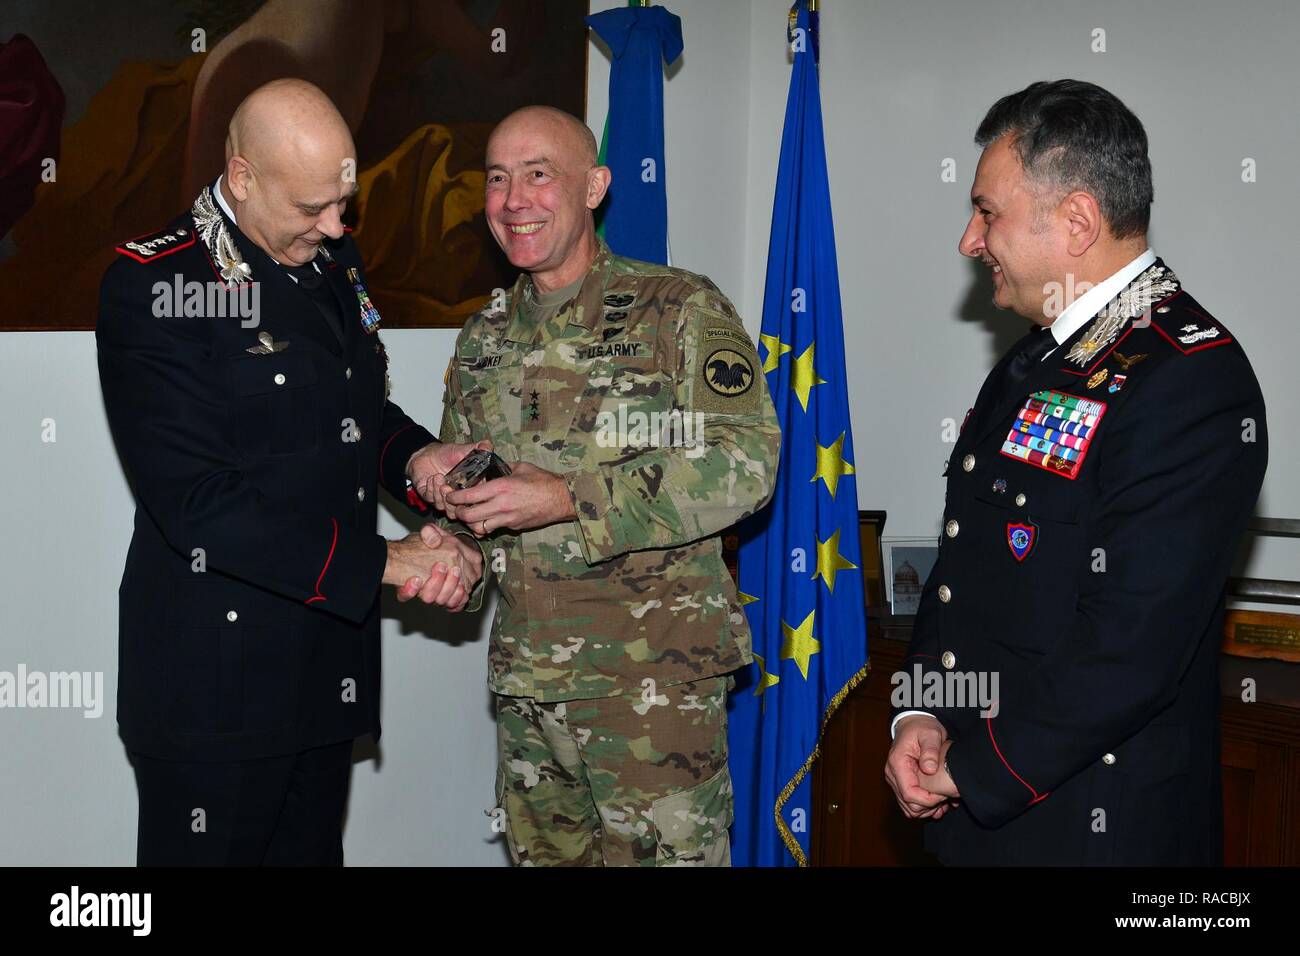 Brig. Gen. Giovanni Pietro Barbano (right), Center of Excellence for Stability Police Units (CoESPU) director, observa, Lt. Gen. Charles D. Luckey (center), Commanding General U.S. Army Reserve Command, present a gift at Lt. Gen Vincenzo Coppola (left), Commanding General “Palidoro” Carabinieri Specialized and Mobile Units during visit at Center of Excellence for Stability Police Units (CoESPU) Vicenza, Italy, January 20, 2017. Stock Photo